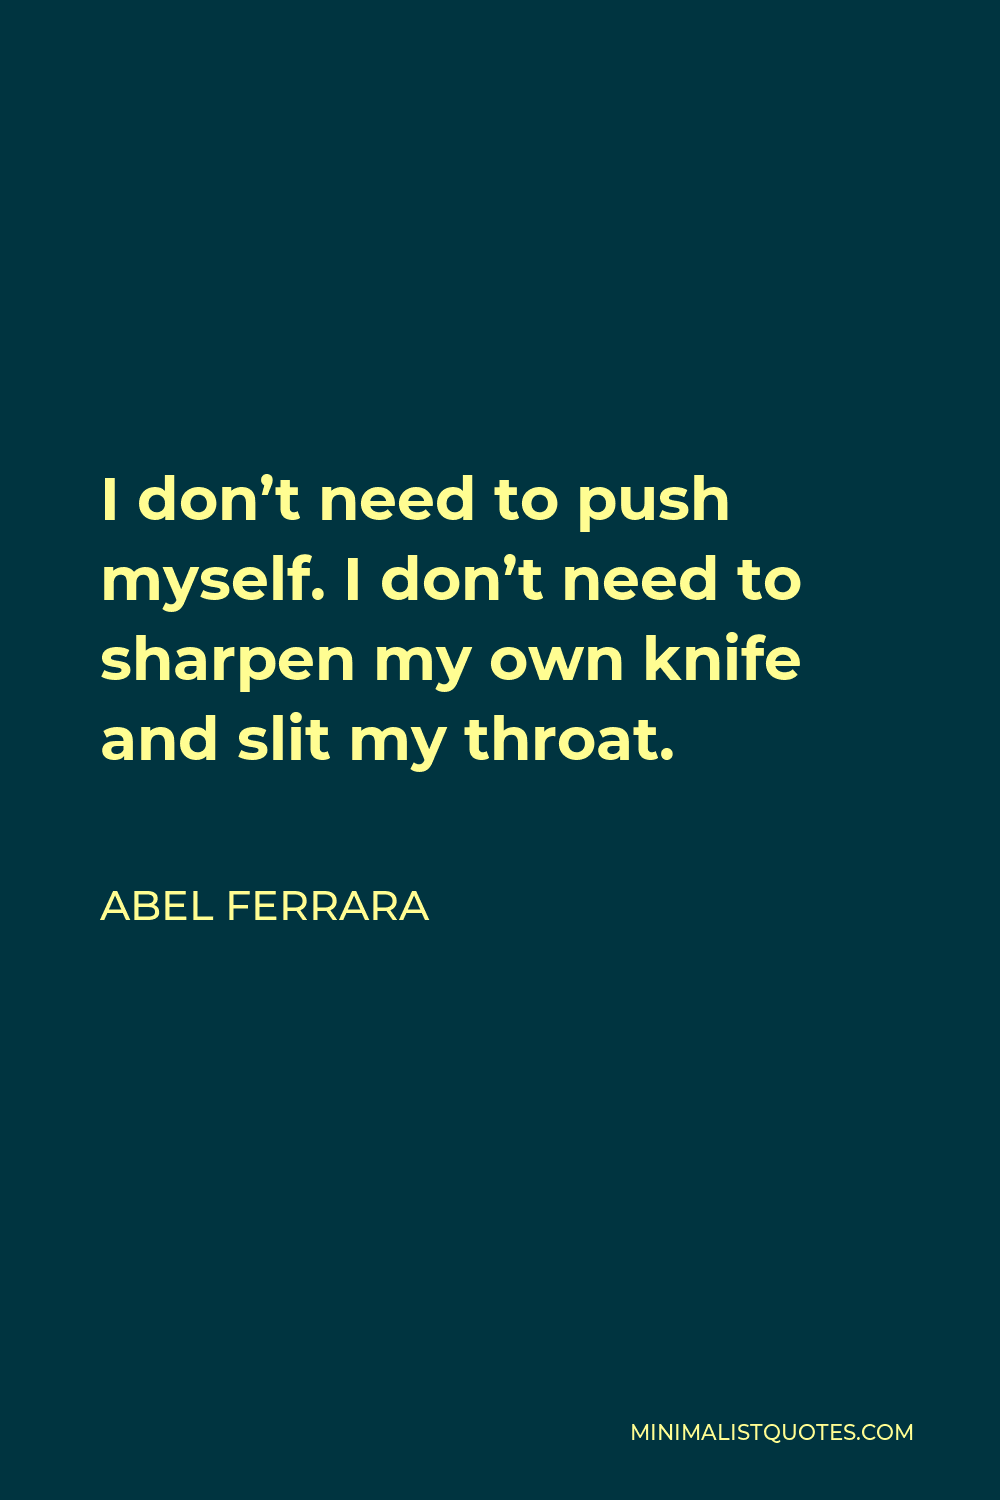 Abel Ferrara Quote - I don’t need to push myself. I don’t need to sharpen my own knife and slit my throat.